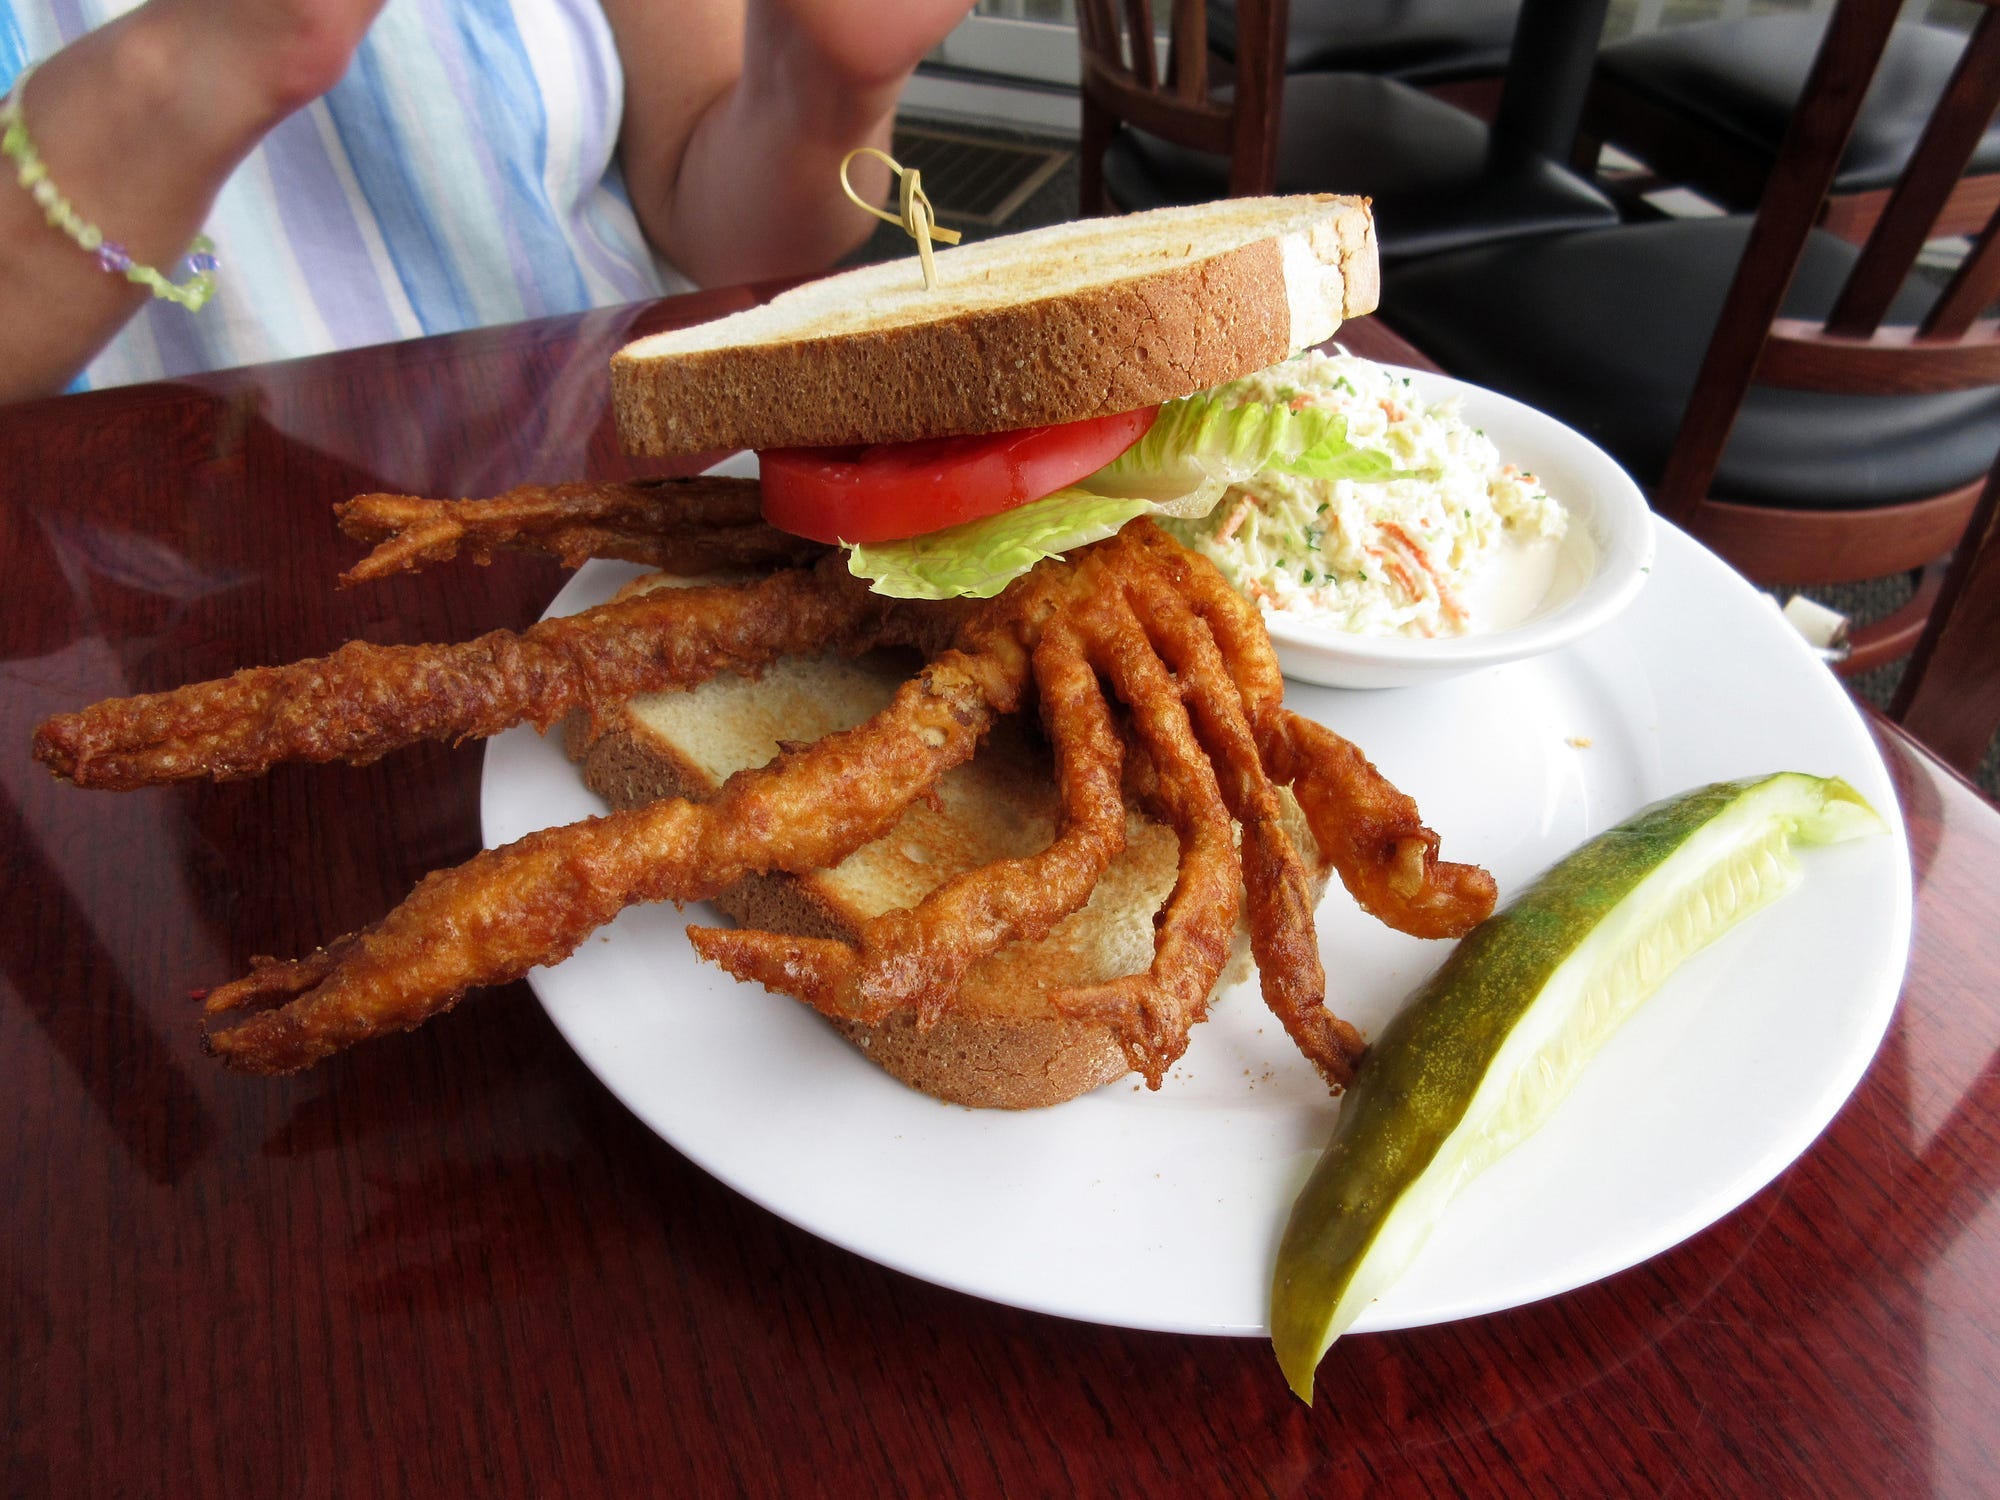 <p>Anyone visiting this fishing Mecca should try a soft-shell fried crab sandwich topped with coleslaw and leafy greens. Yum.</p>